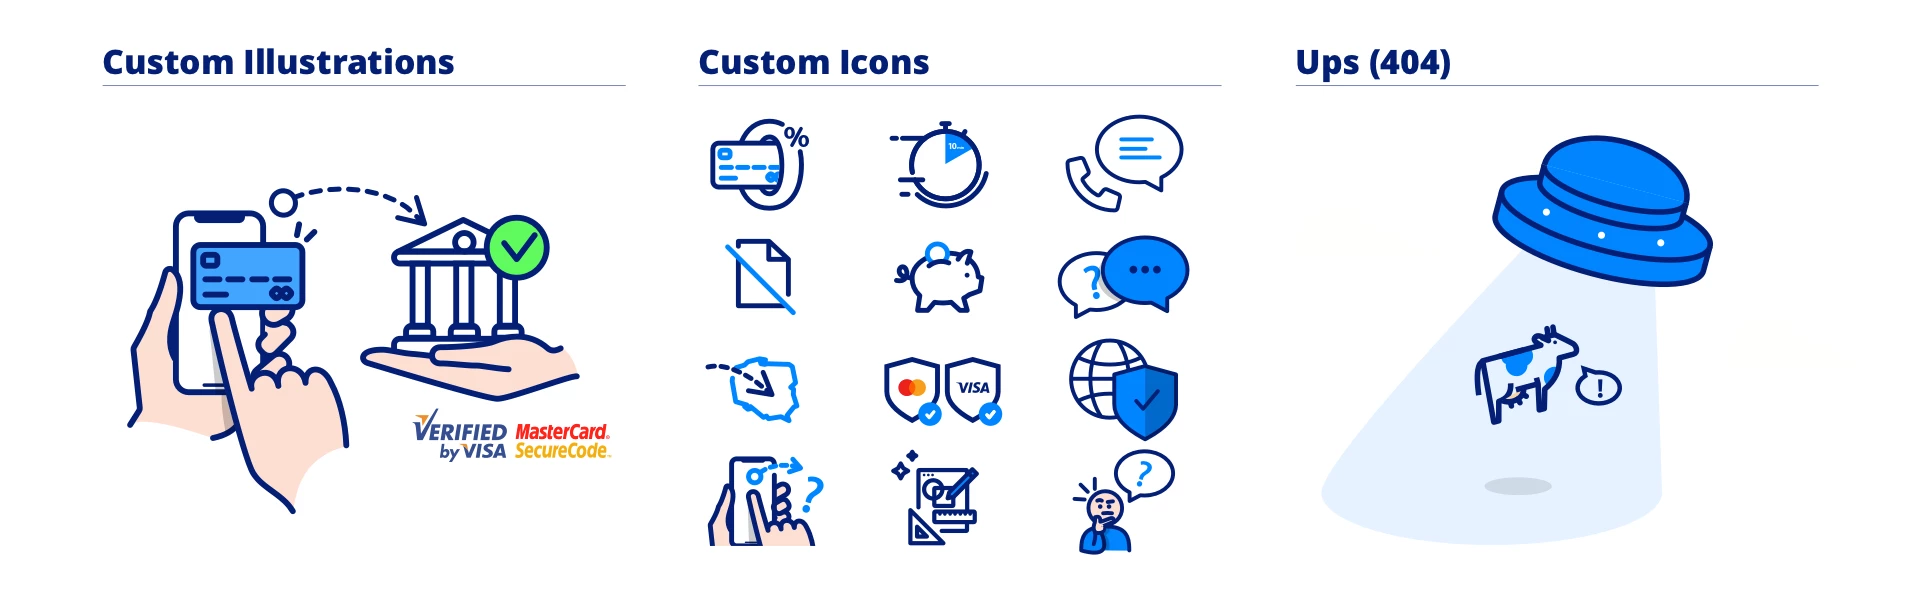 Presentation of Custom Illustrations and Icons made for Transfer24